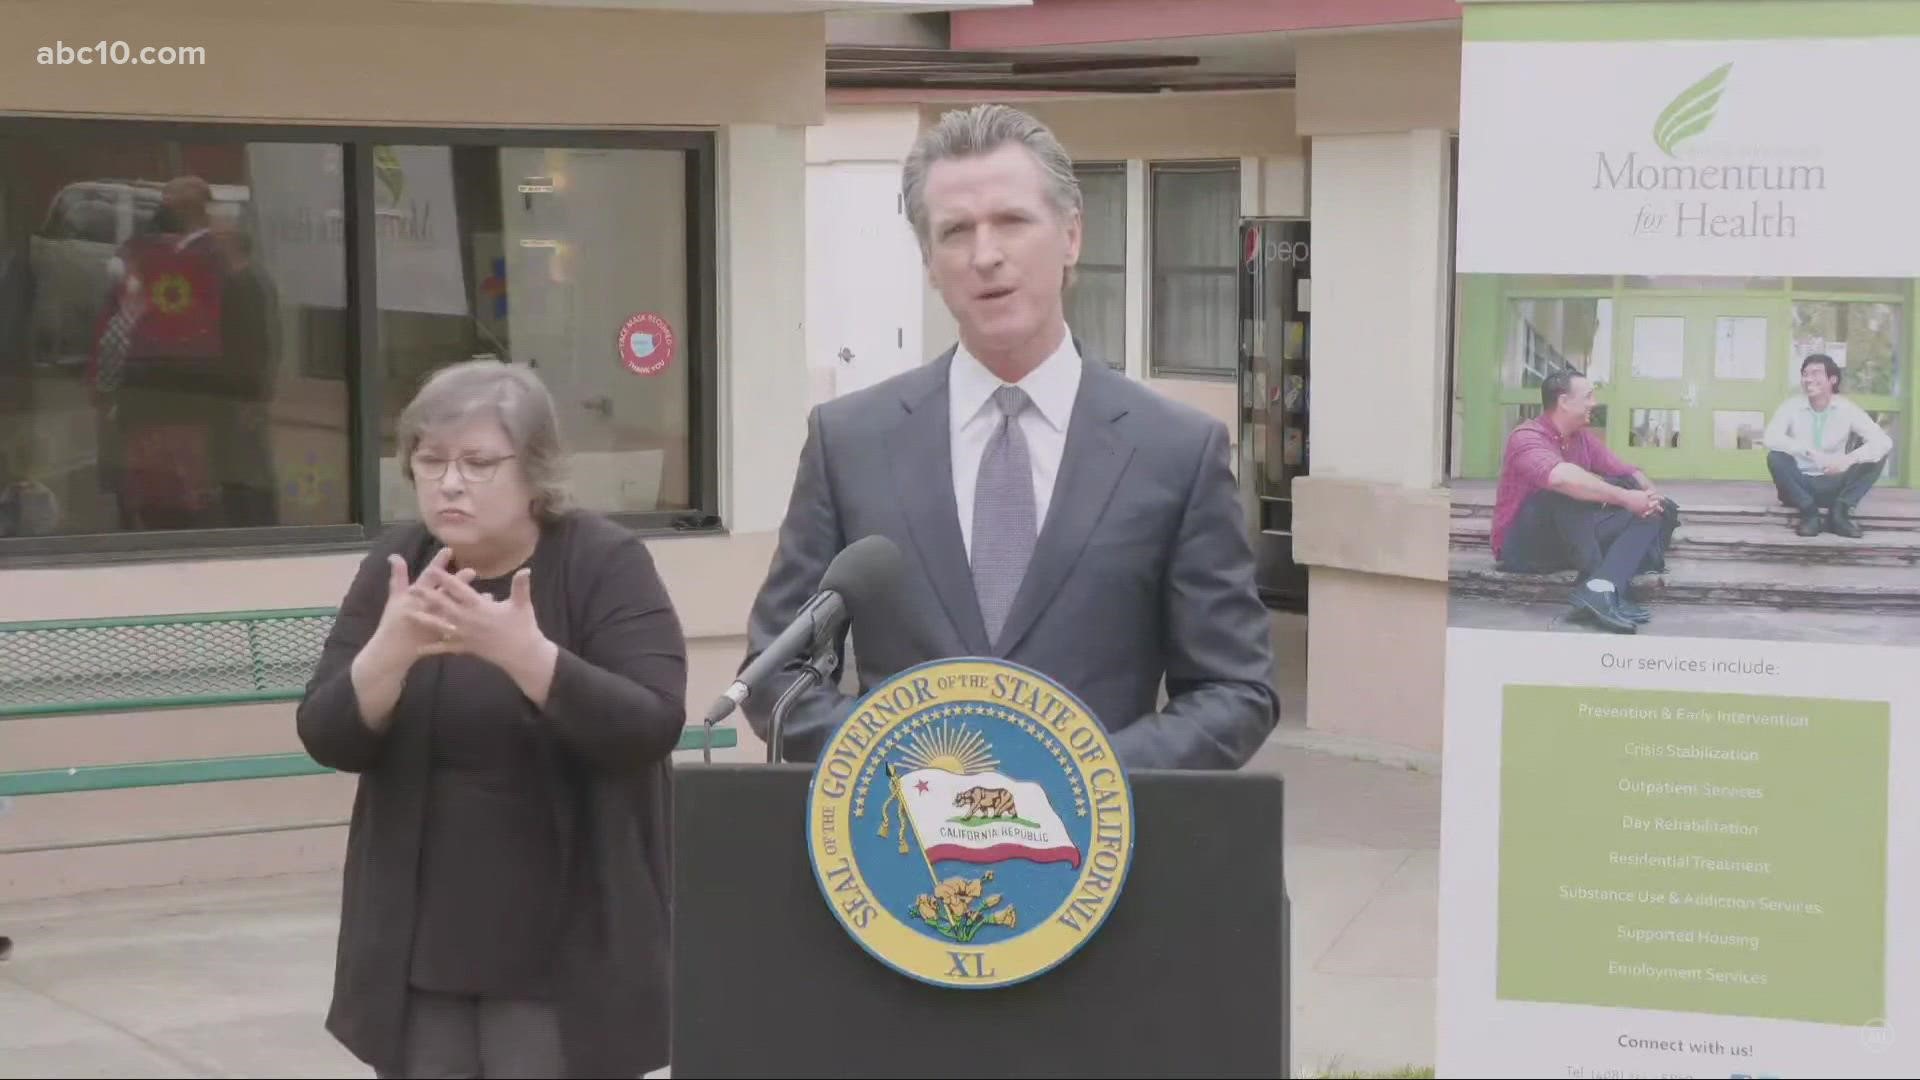 The proposal by Gov. Newsom would require all counties in California to set up a mental health branch in civil court to assist people in need of help.